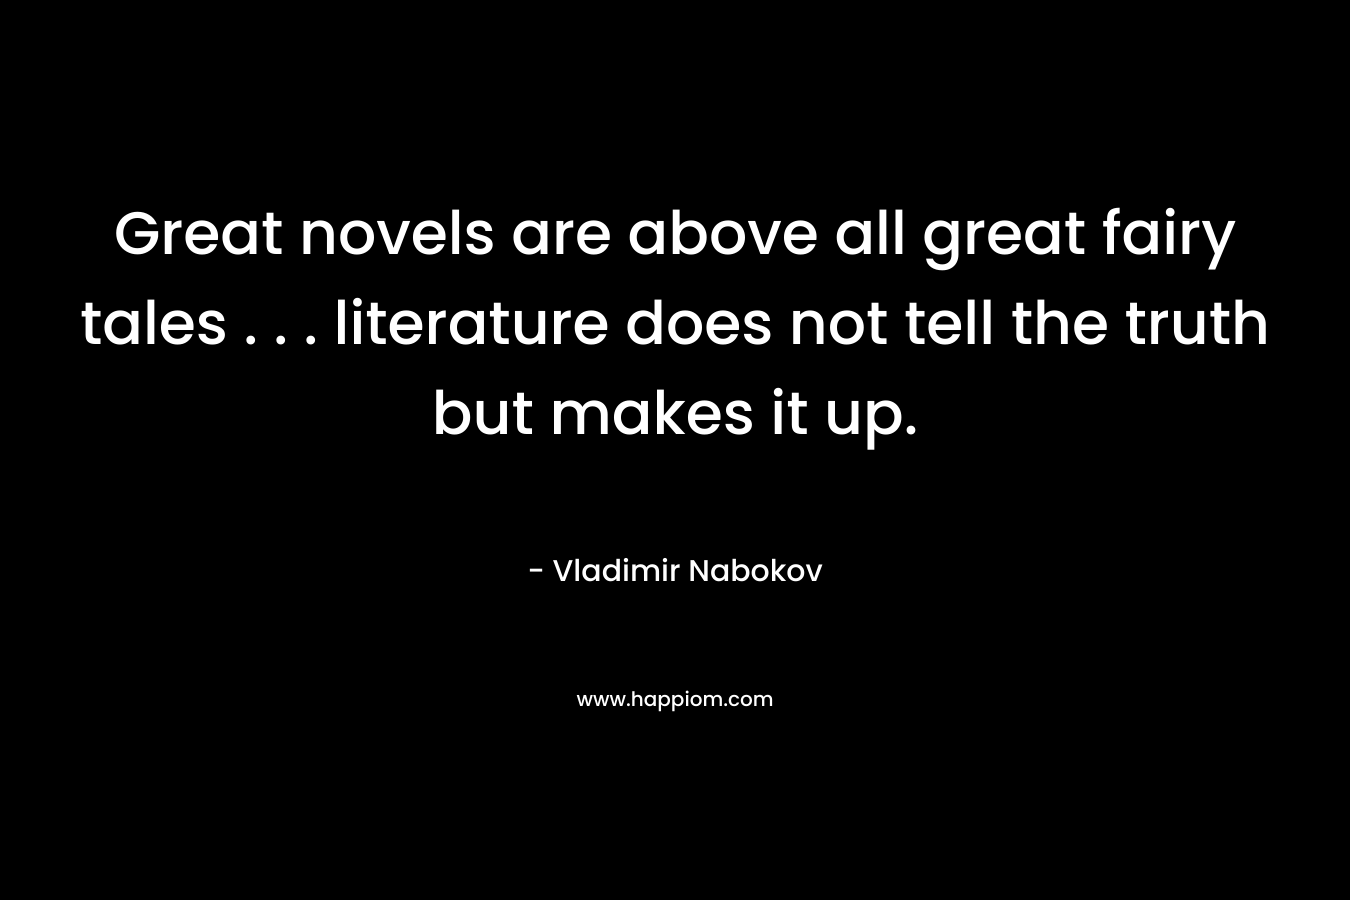 Great novels are above all great fairy tales . . . literature does not tell the truth but makes it up.